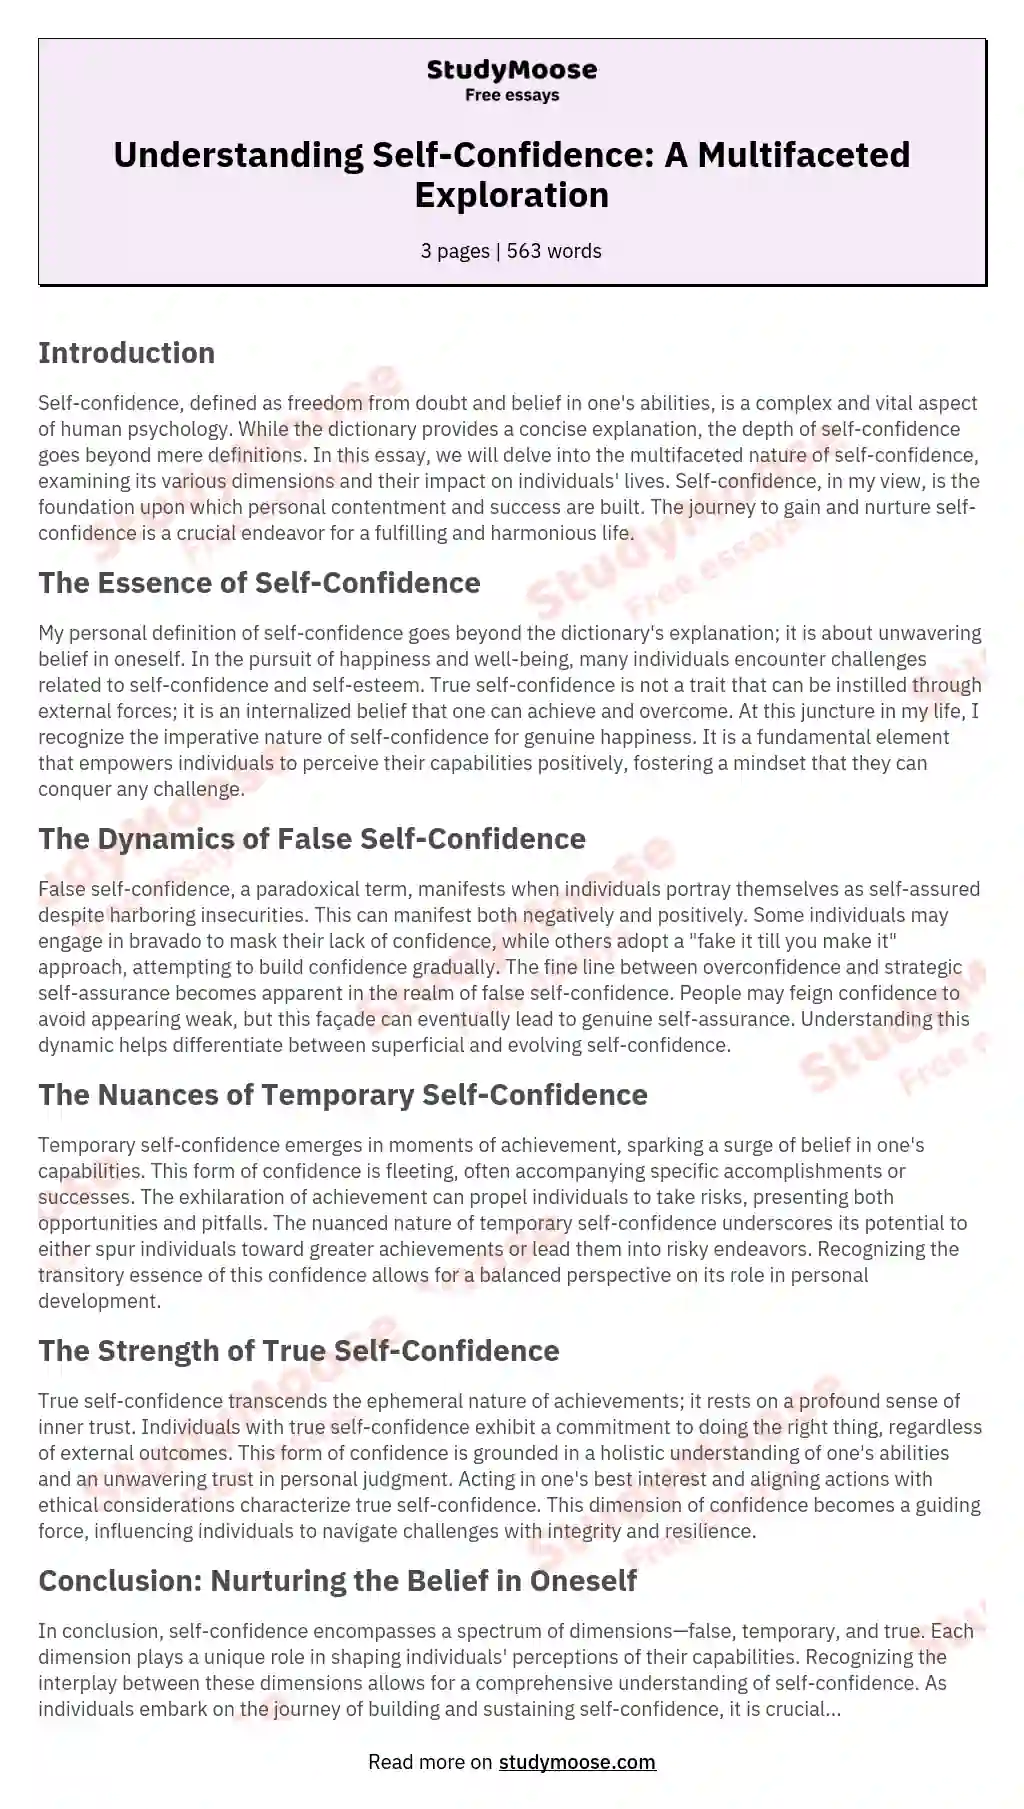 Understanding Self-Confidence: A Multifaceted Exploration essay